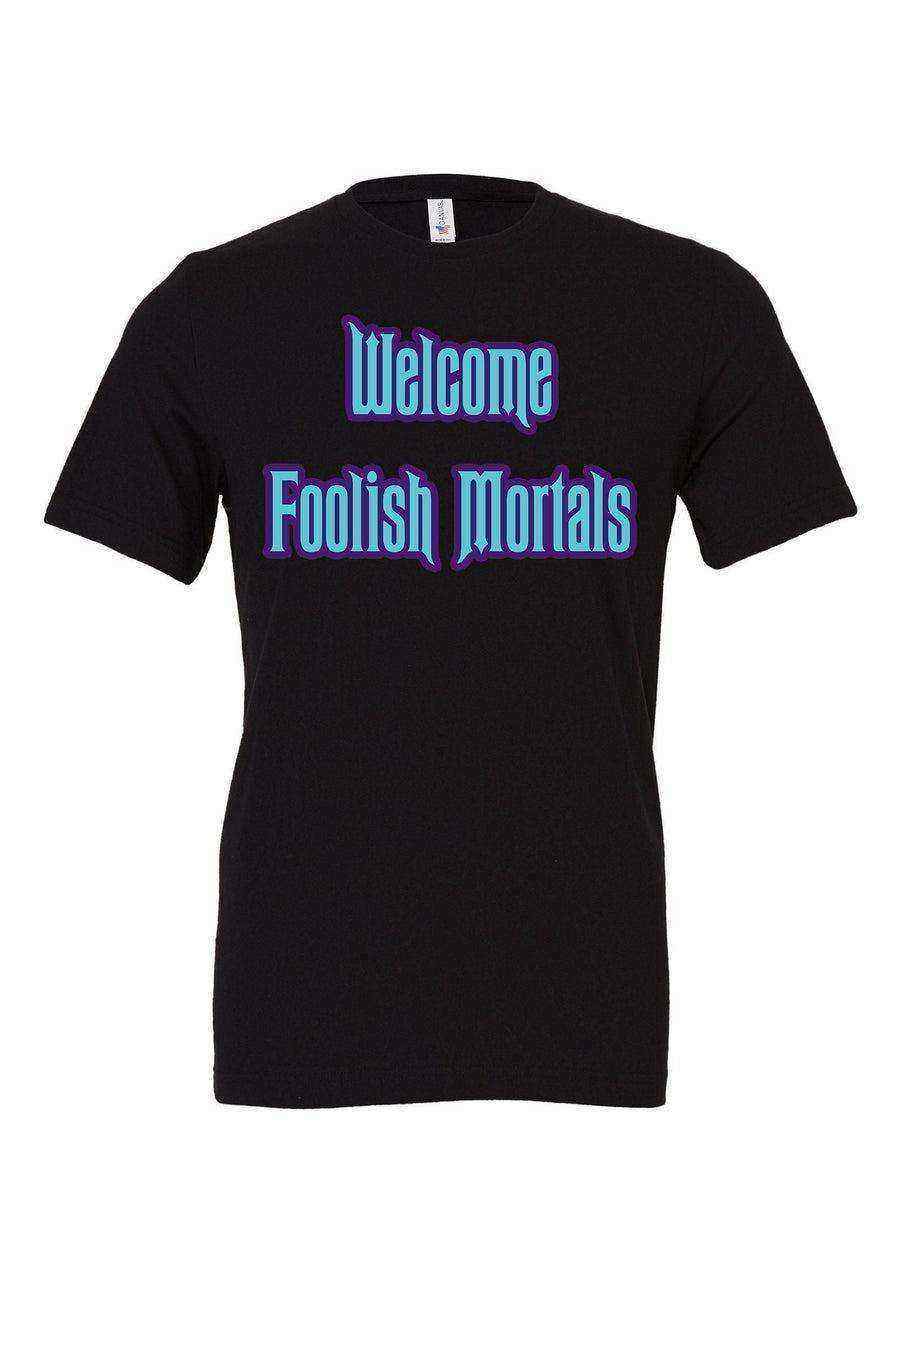 Toddler | Welcome Foolish Mortals Shirt | Haunted Mansion Tee - Dylan's Tees